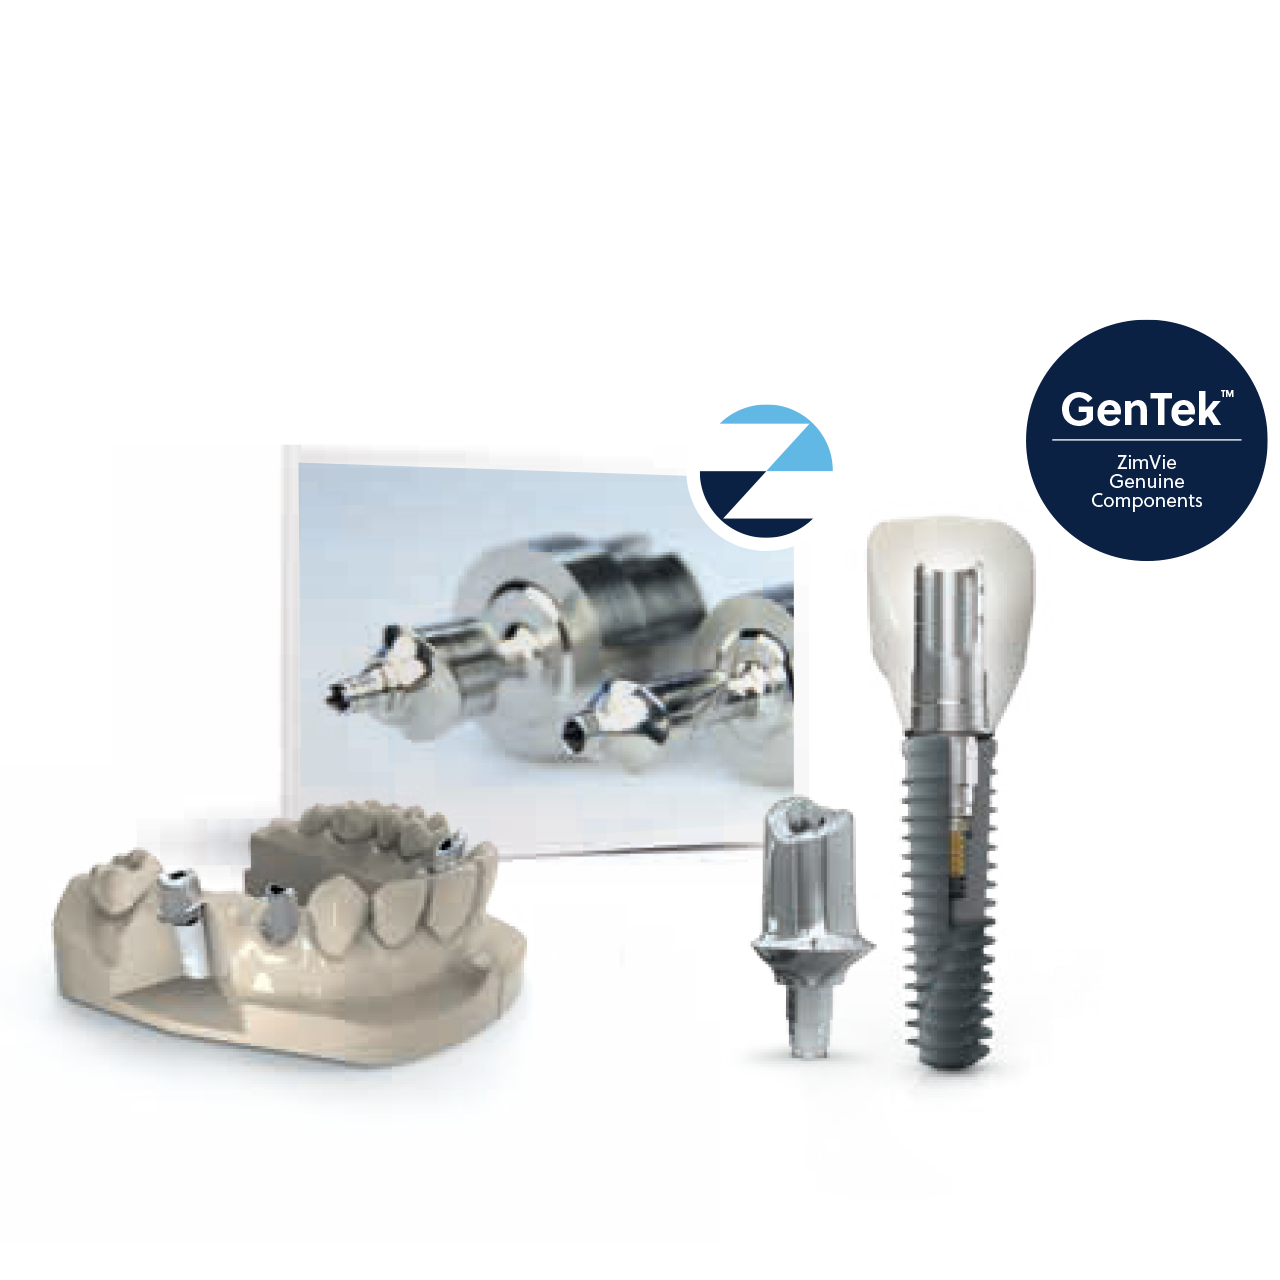 Have your dental lab make the prosthesis using a GenTek OEM component, or have your dental technician submit the case for a ZimVie milled patient-specific abutment and 3D printed model.